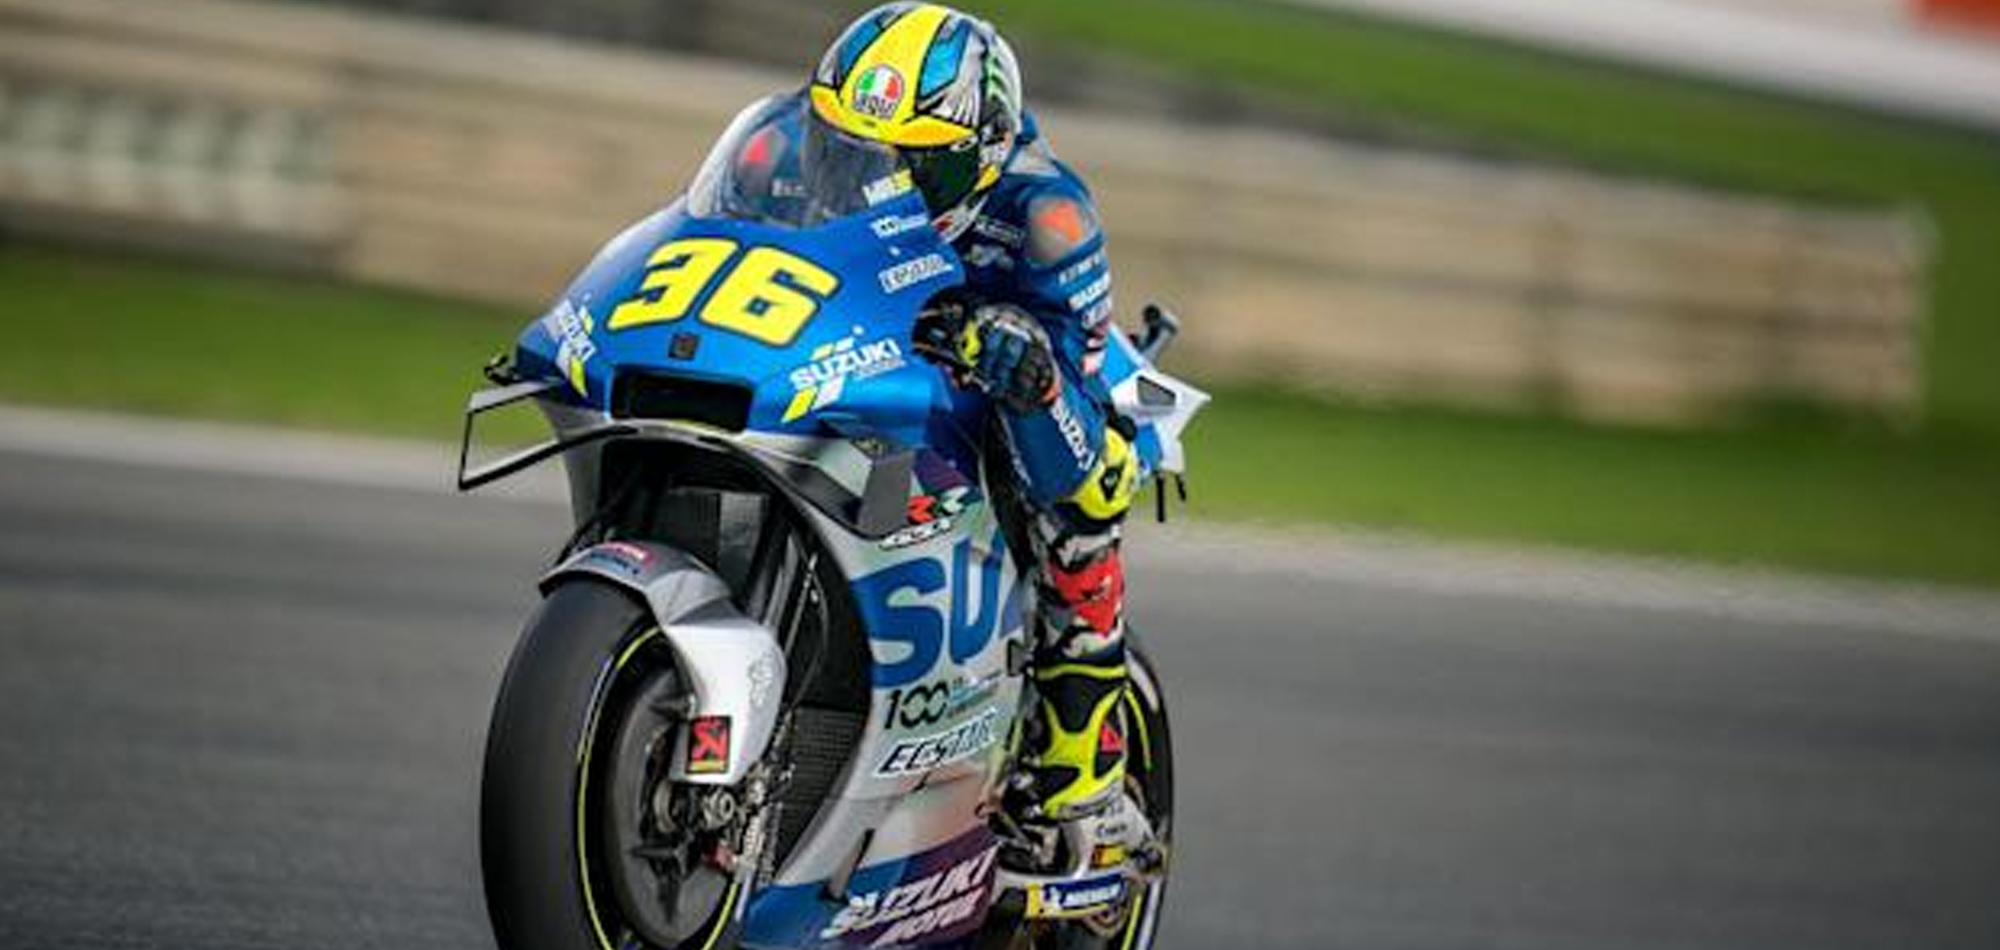 MotoGP: Suzuki ask to leave contract because of 